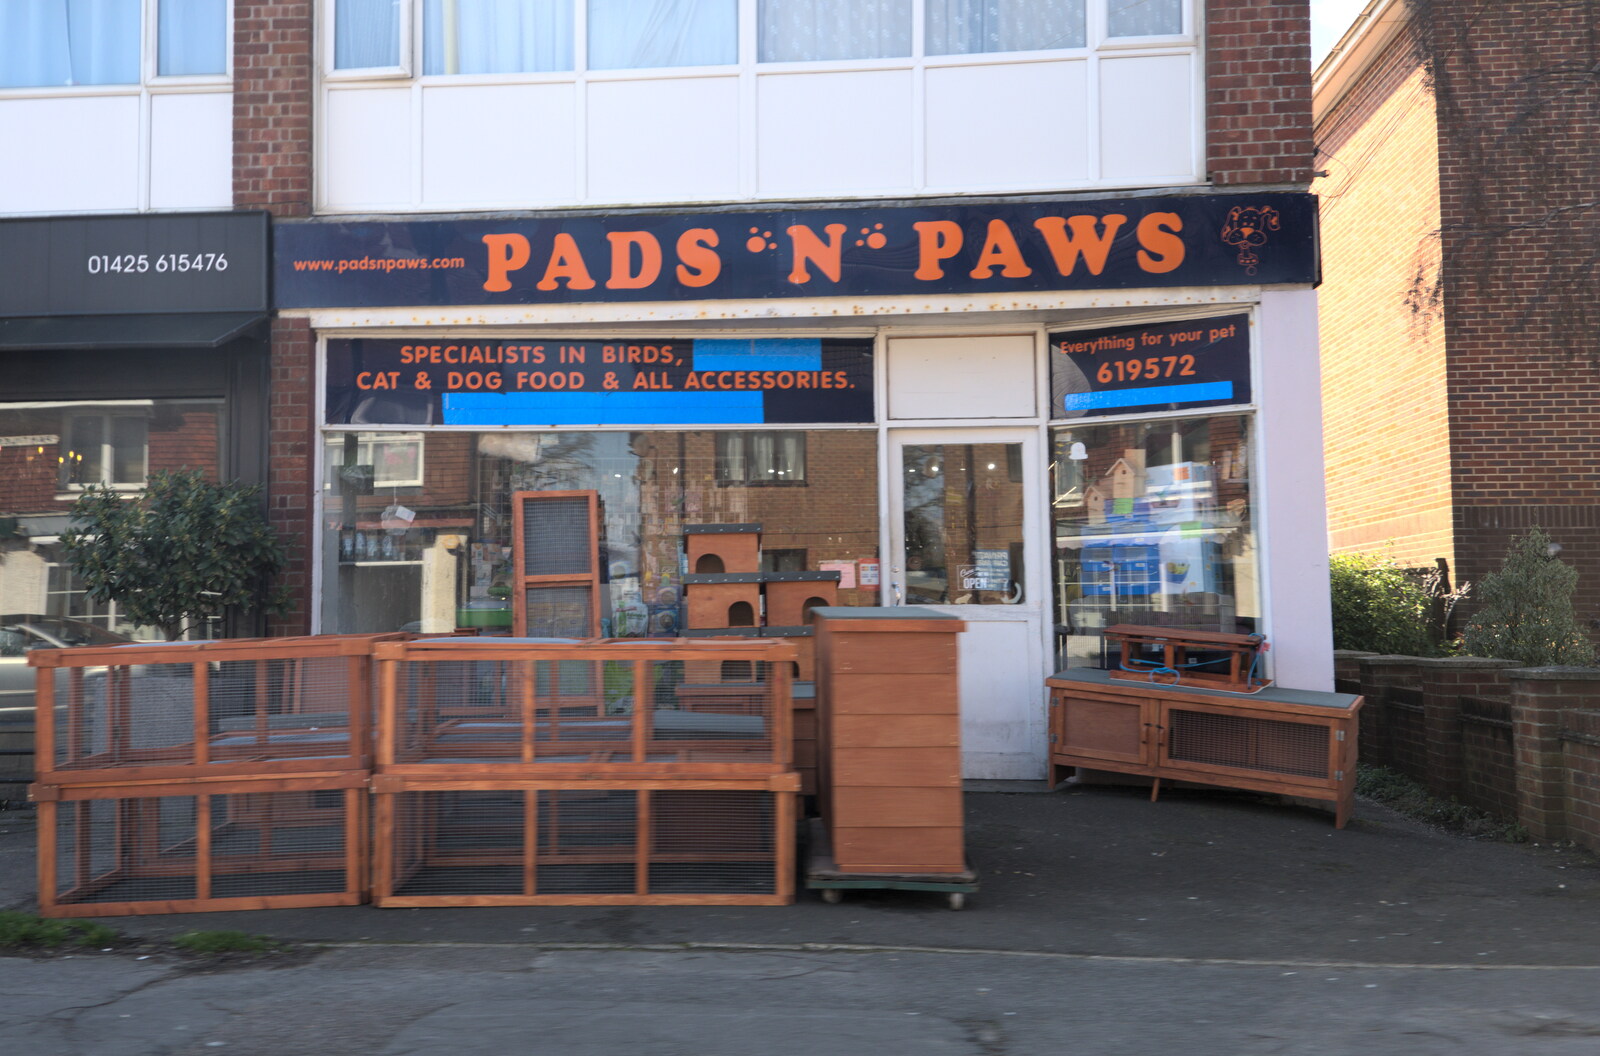 Pads n Paws has been going since the 80s from A Day in New Milton, Hampshire - 3rd April 2023